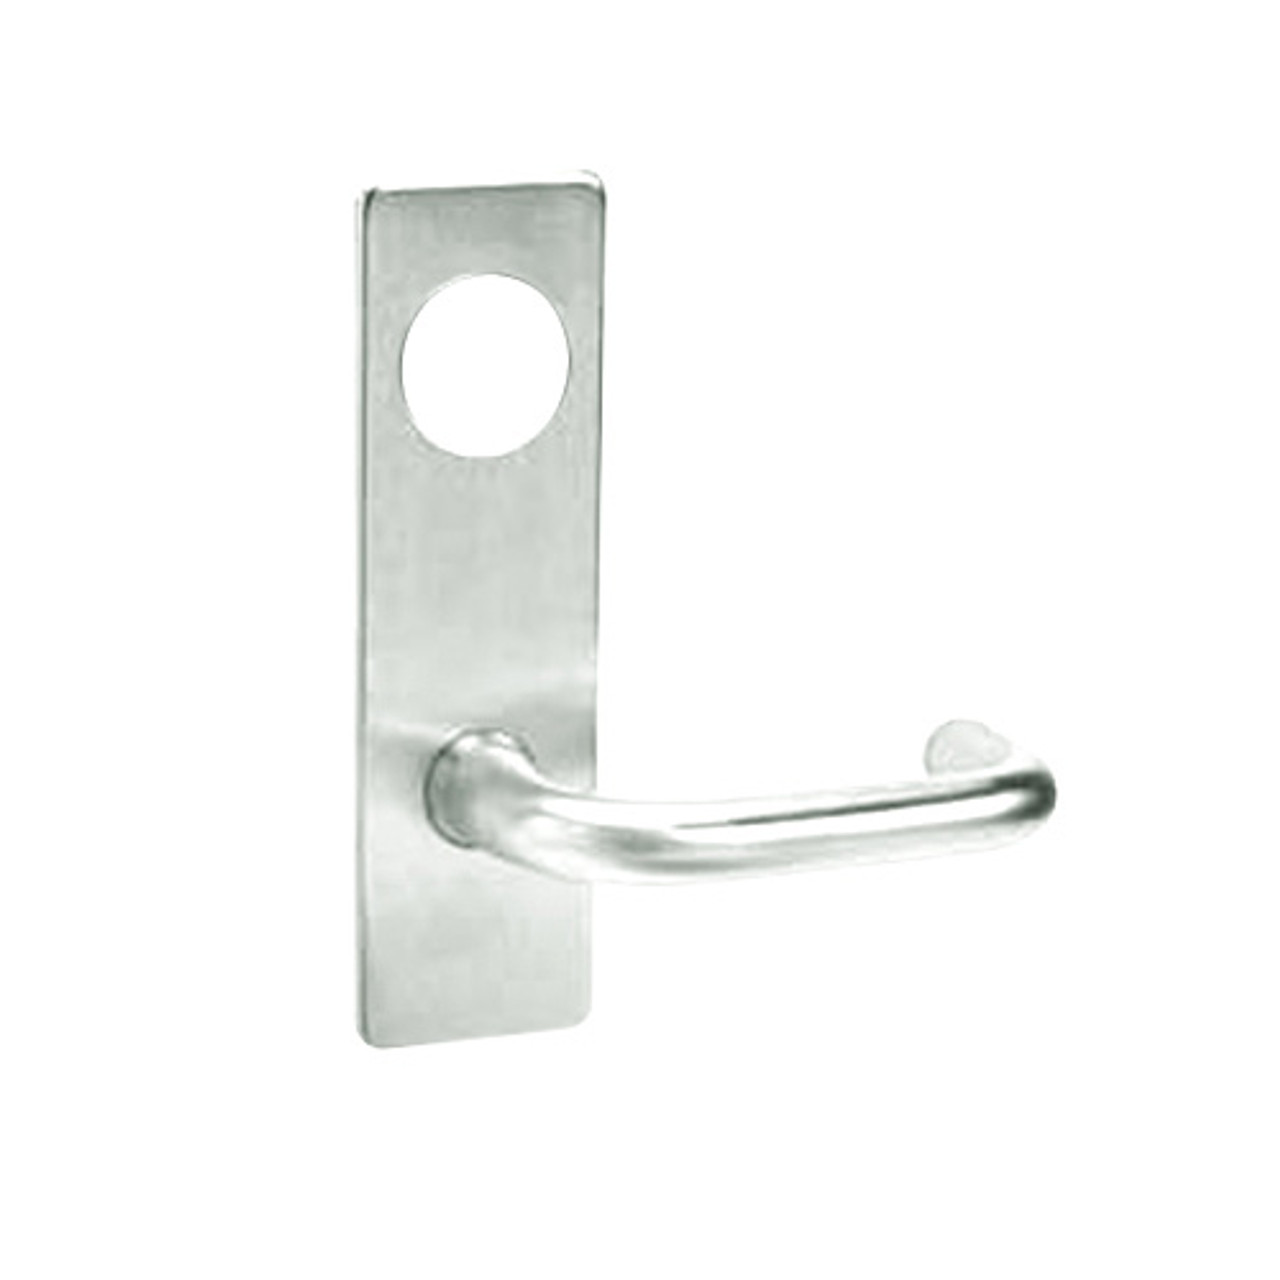 ML2056-LWP-618-CL6 Corbin Russwin ML2000 Series IC 6-Pin Less Core Mortise Classroom Locksets with Lustra Lever in Bright Nickel